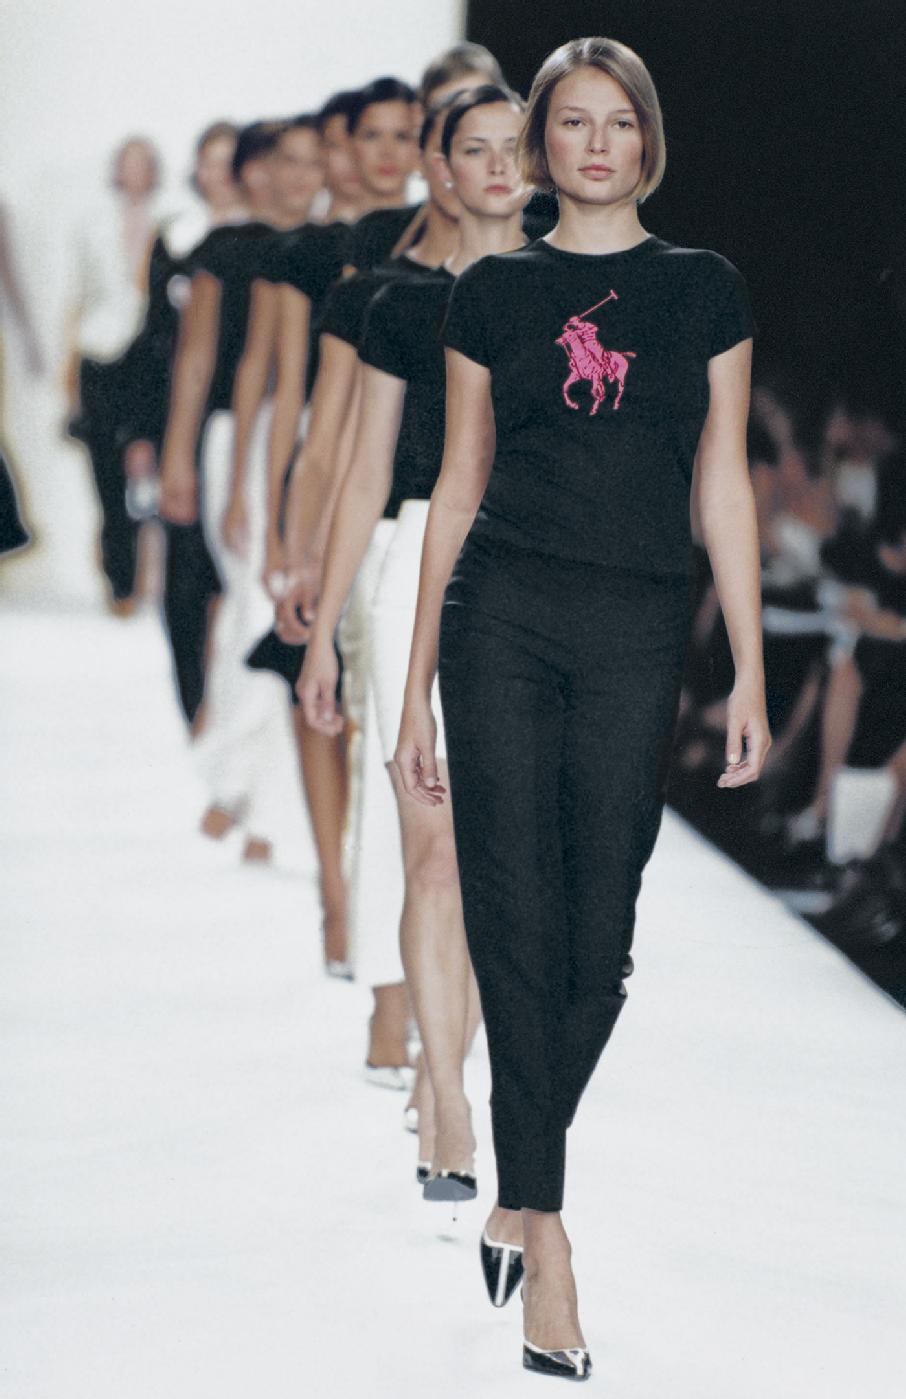  A parade of models, including Bridget Hall (front), unveils the first Pink Pony tee at the Spring 2002 Ralph Lauren Collection Runway Show in September 2001